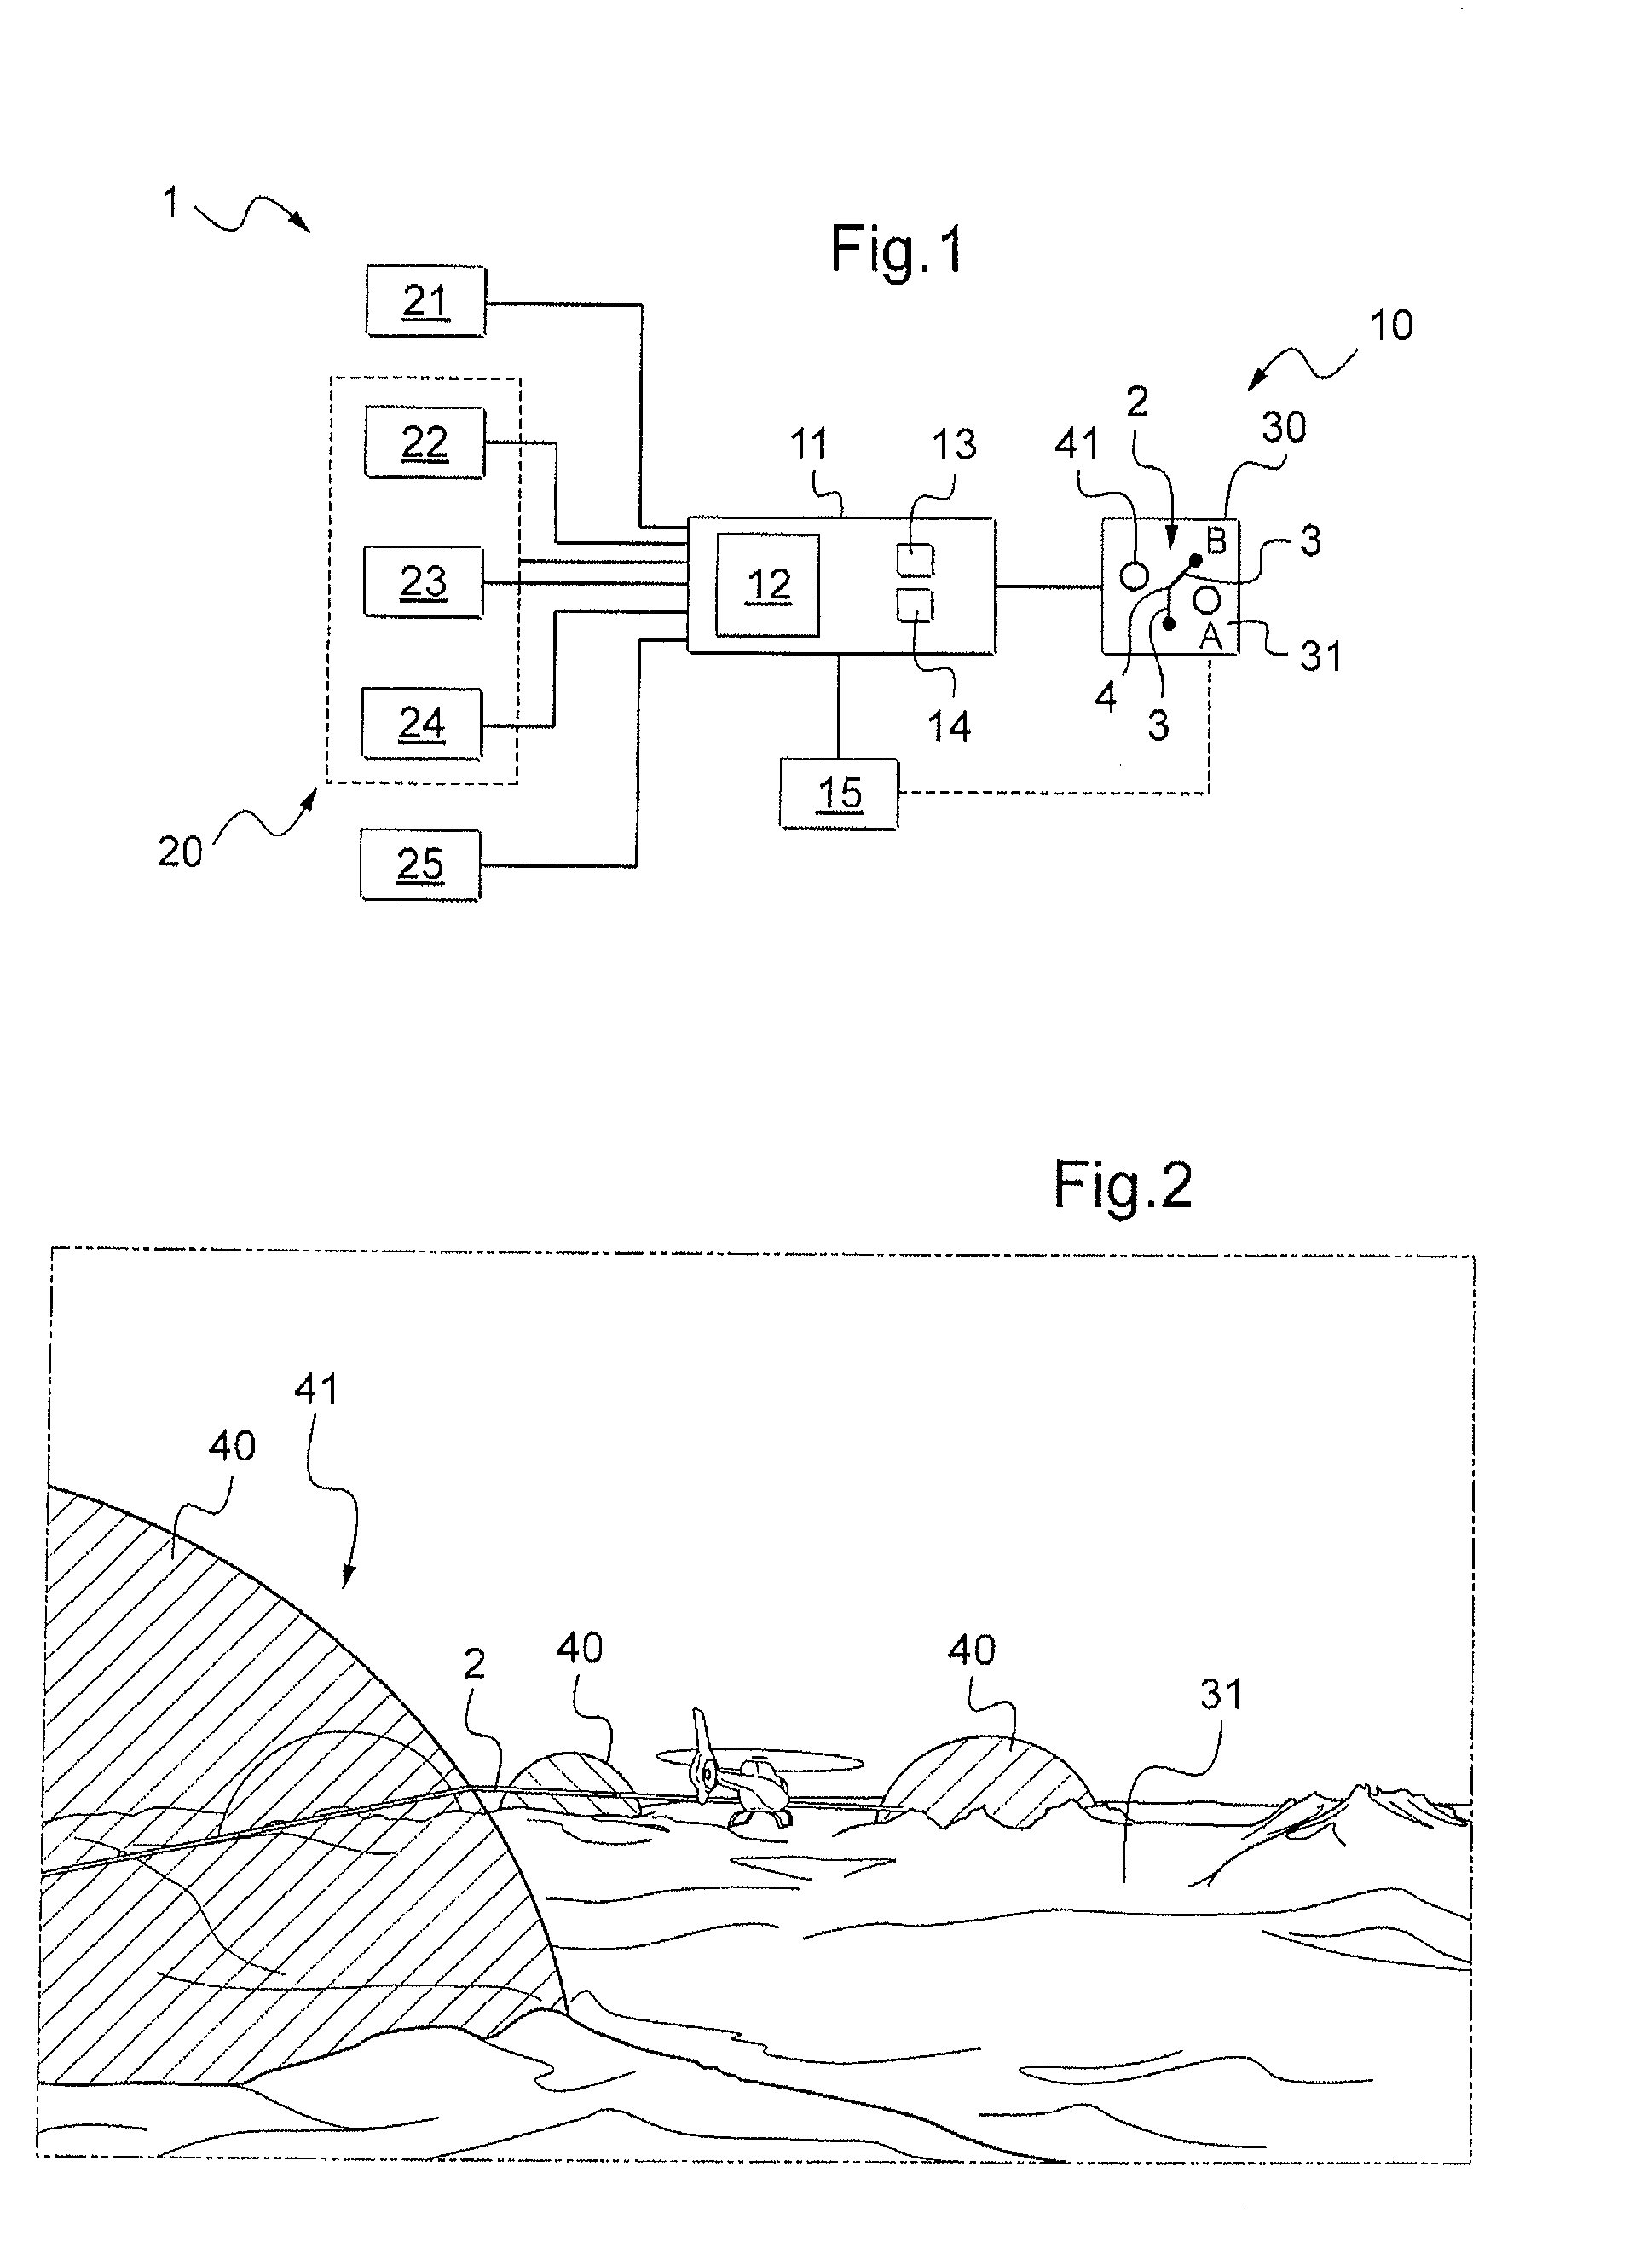 Device and a method for constructing a flight path in order to reach a destination